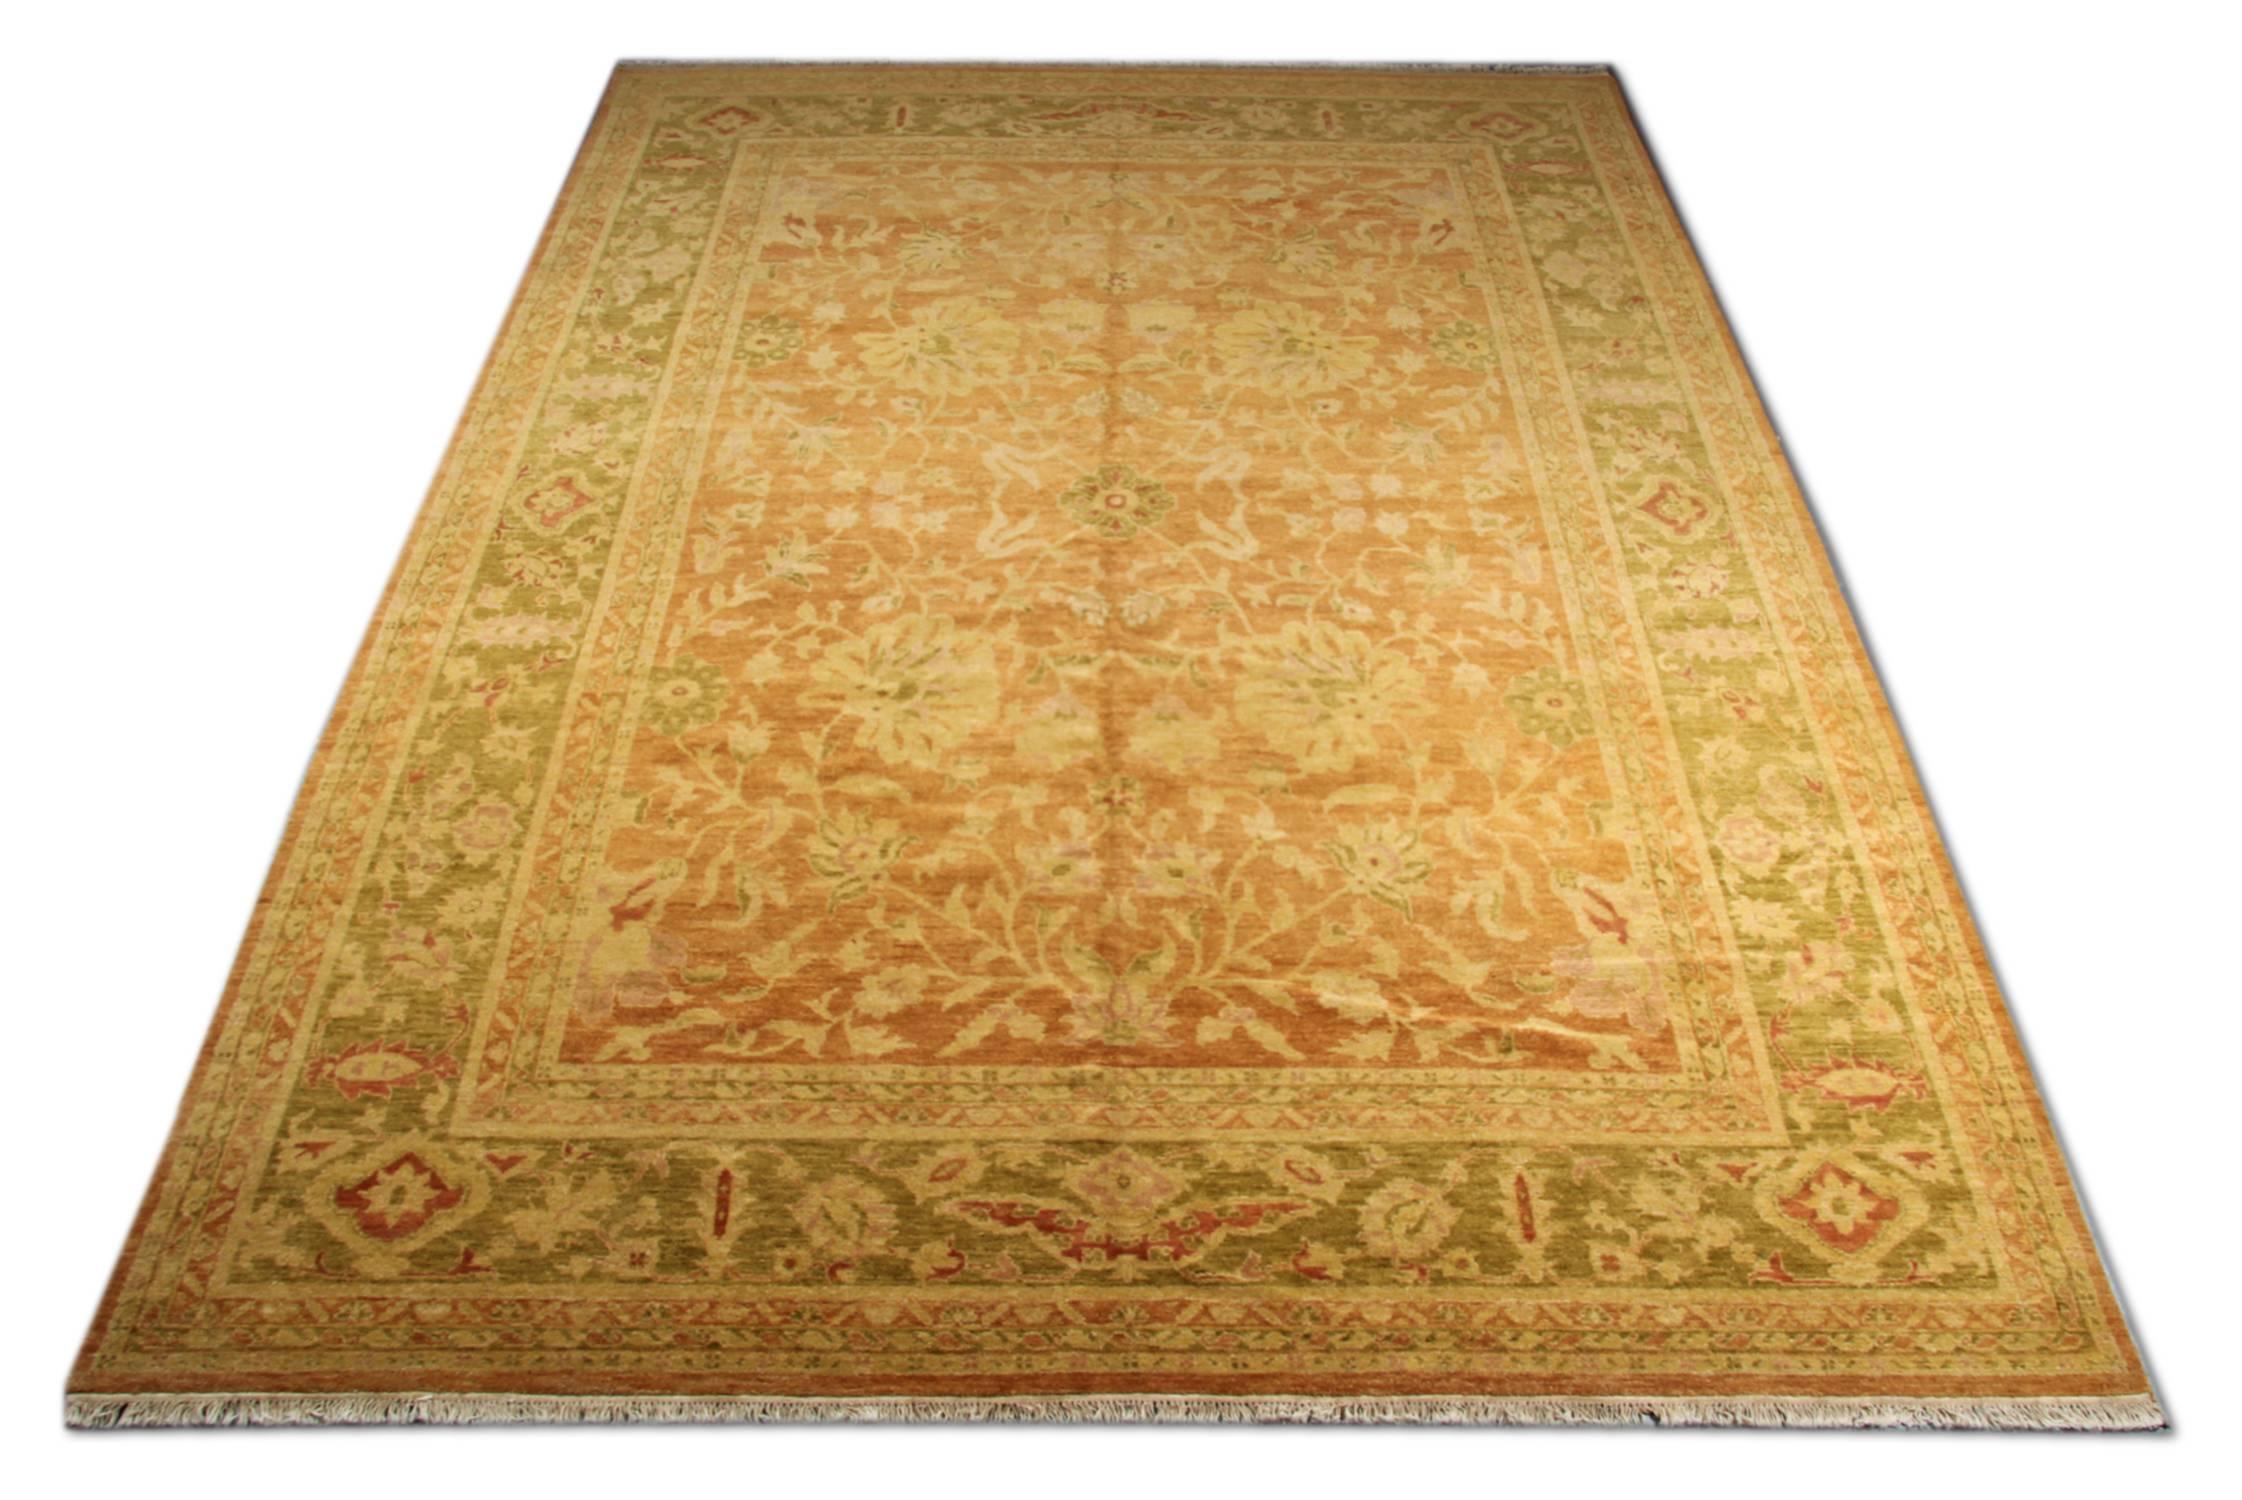 Faithful to the style of many stunning Indian Agra large rugs, this Oriental rug masterpiece, which features an antique rugs design. The floral rug combines vibrant colours with elegantly flowing floral motifs to create a sophisticated surface that